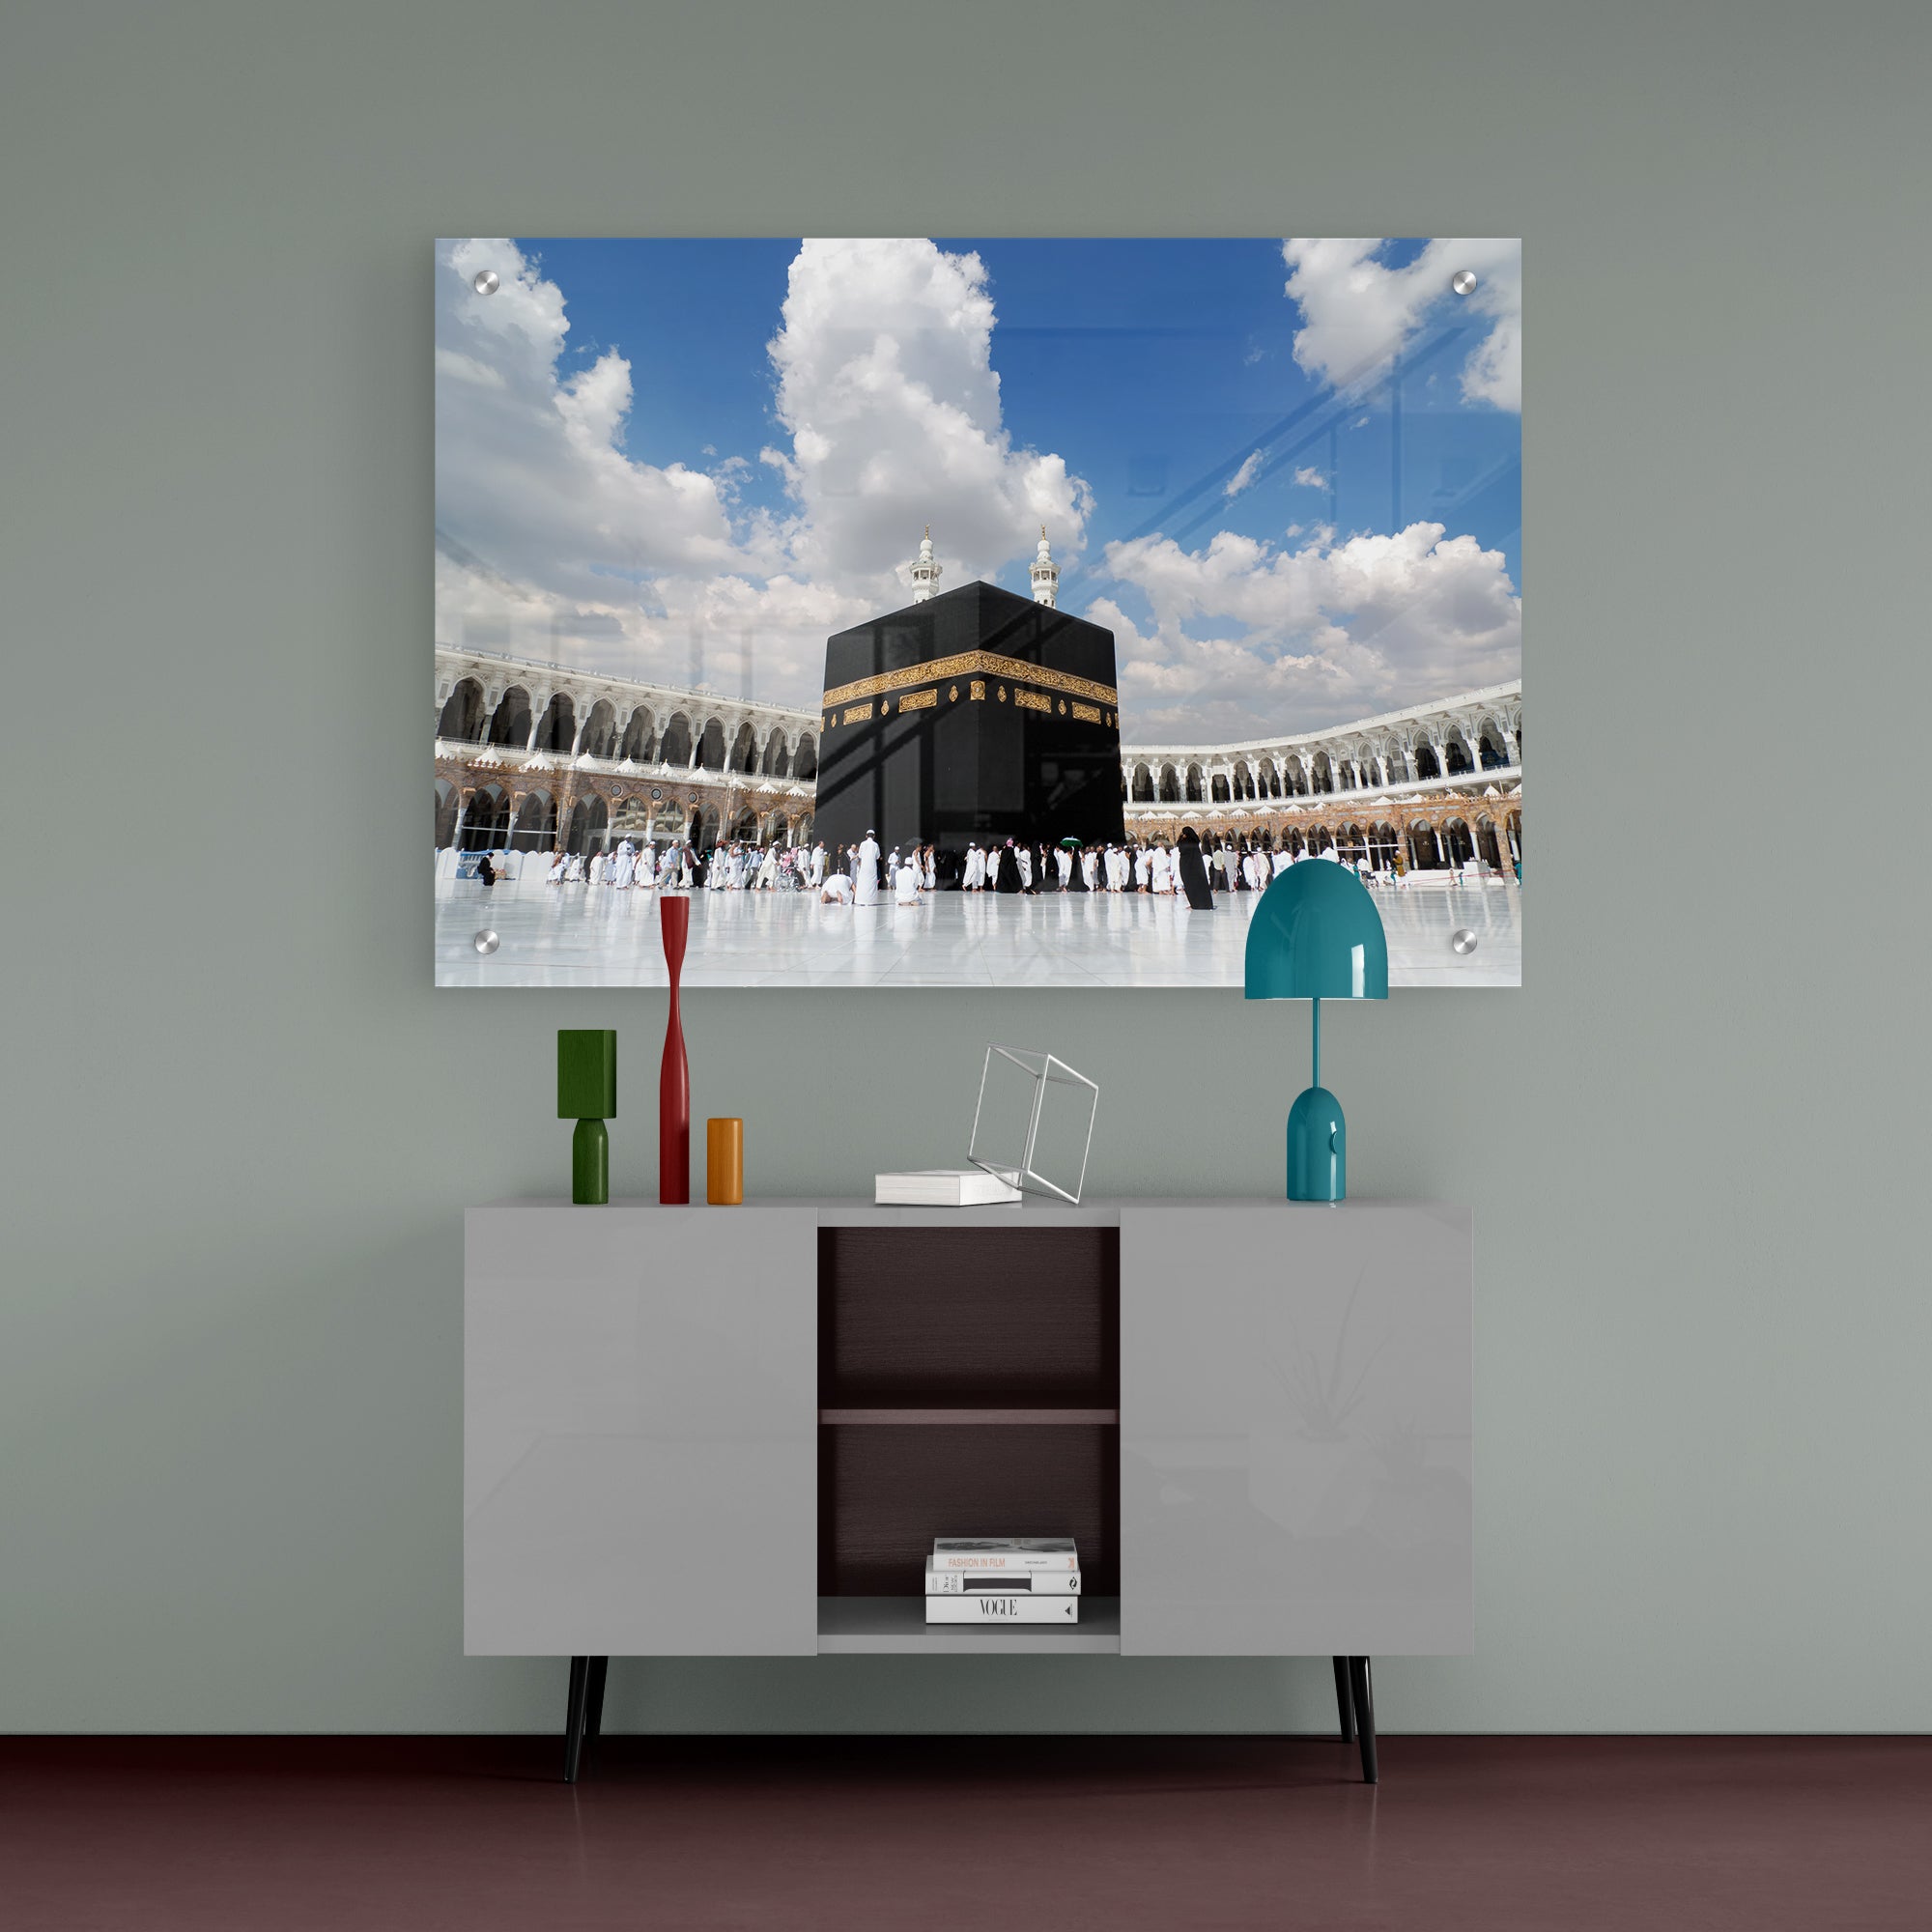 The Beautiful View Of The City Of Mecca Acrylic Wall Painting